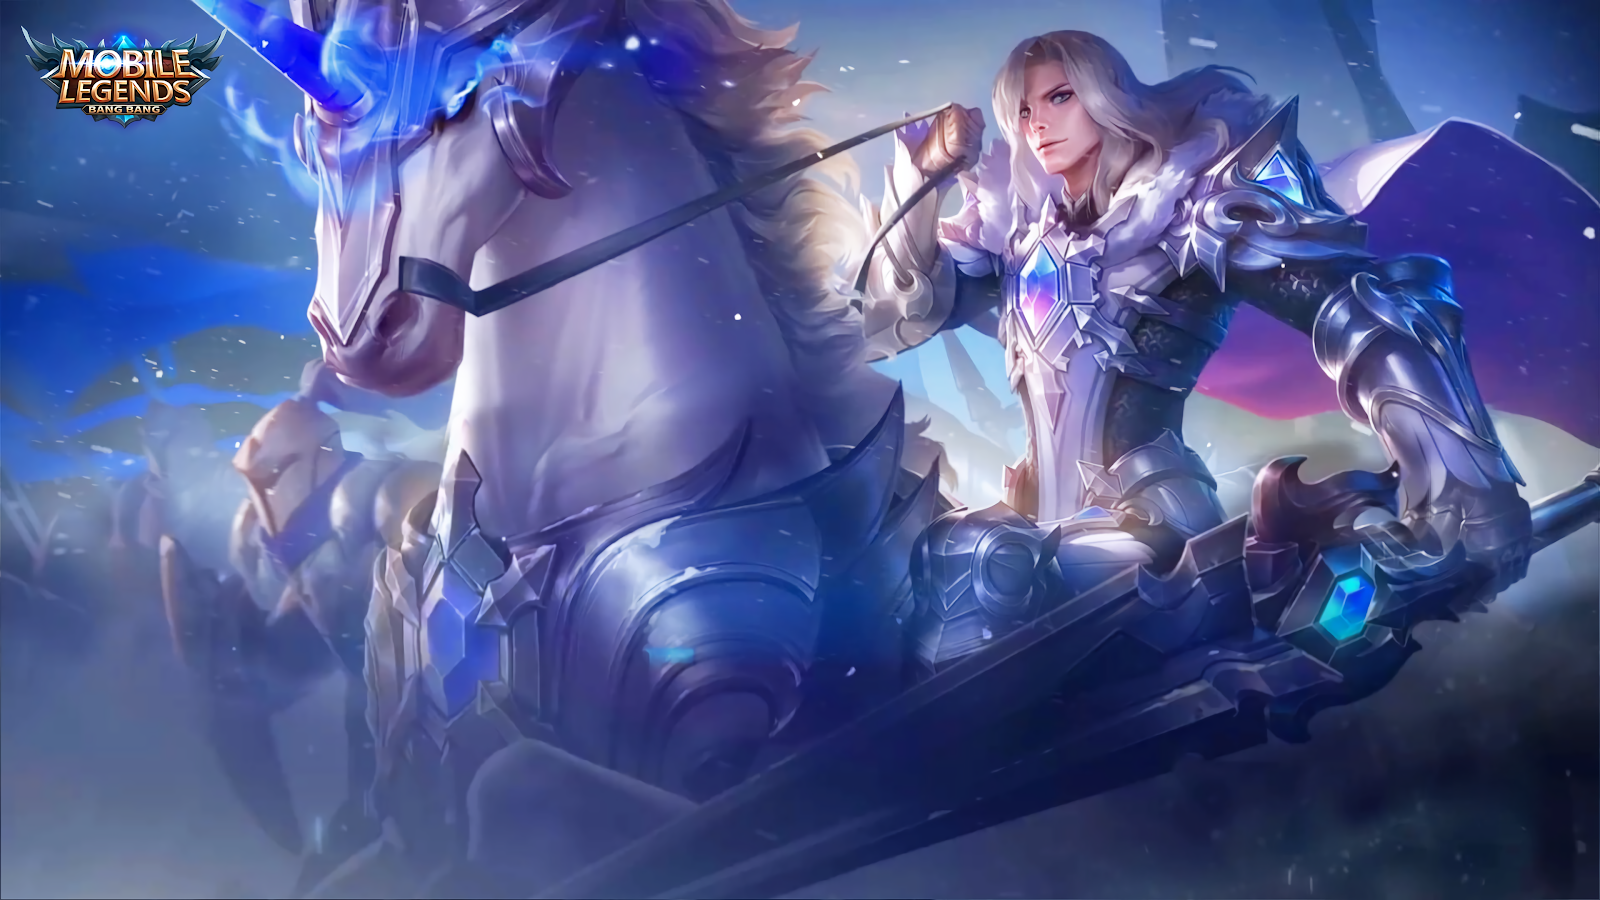 Wallpaper Miya Mobile Legend Hd For Android